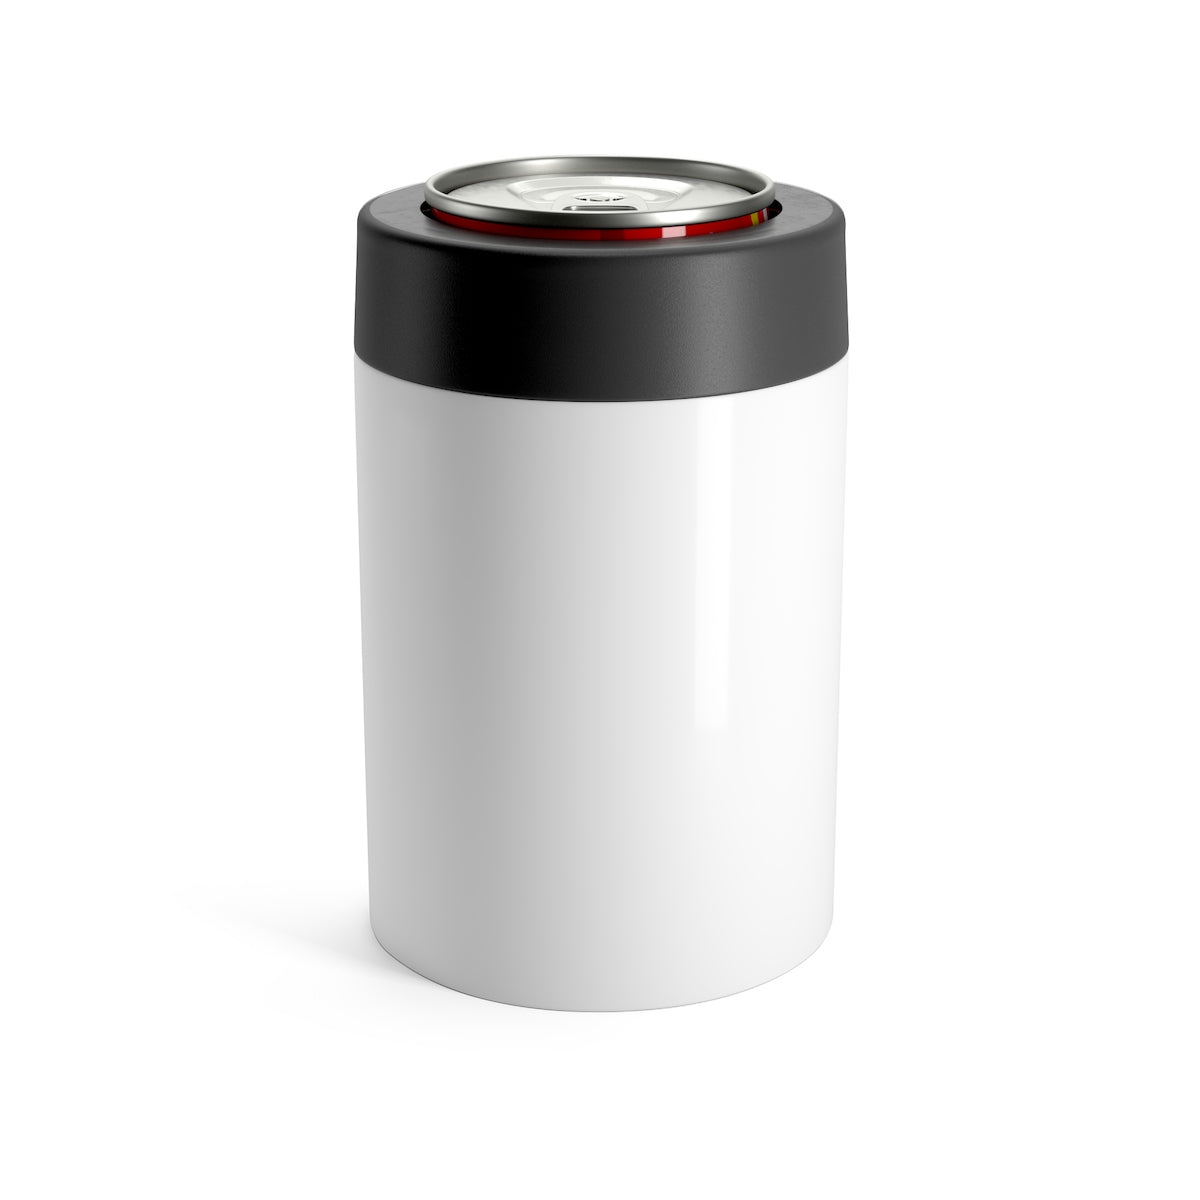 M37 White Stainless Steel Can Holder